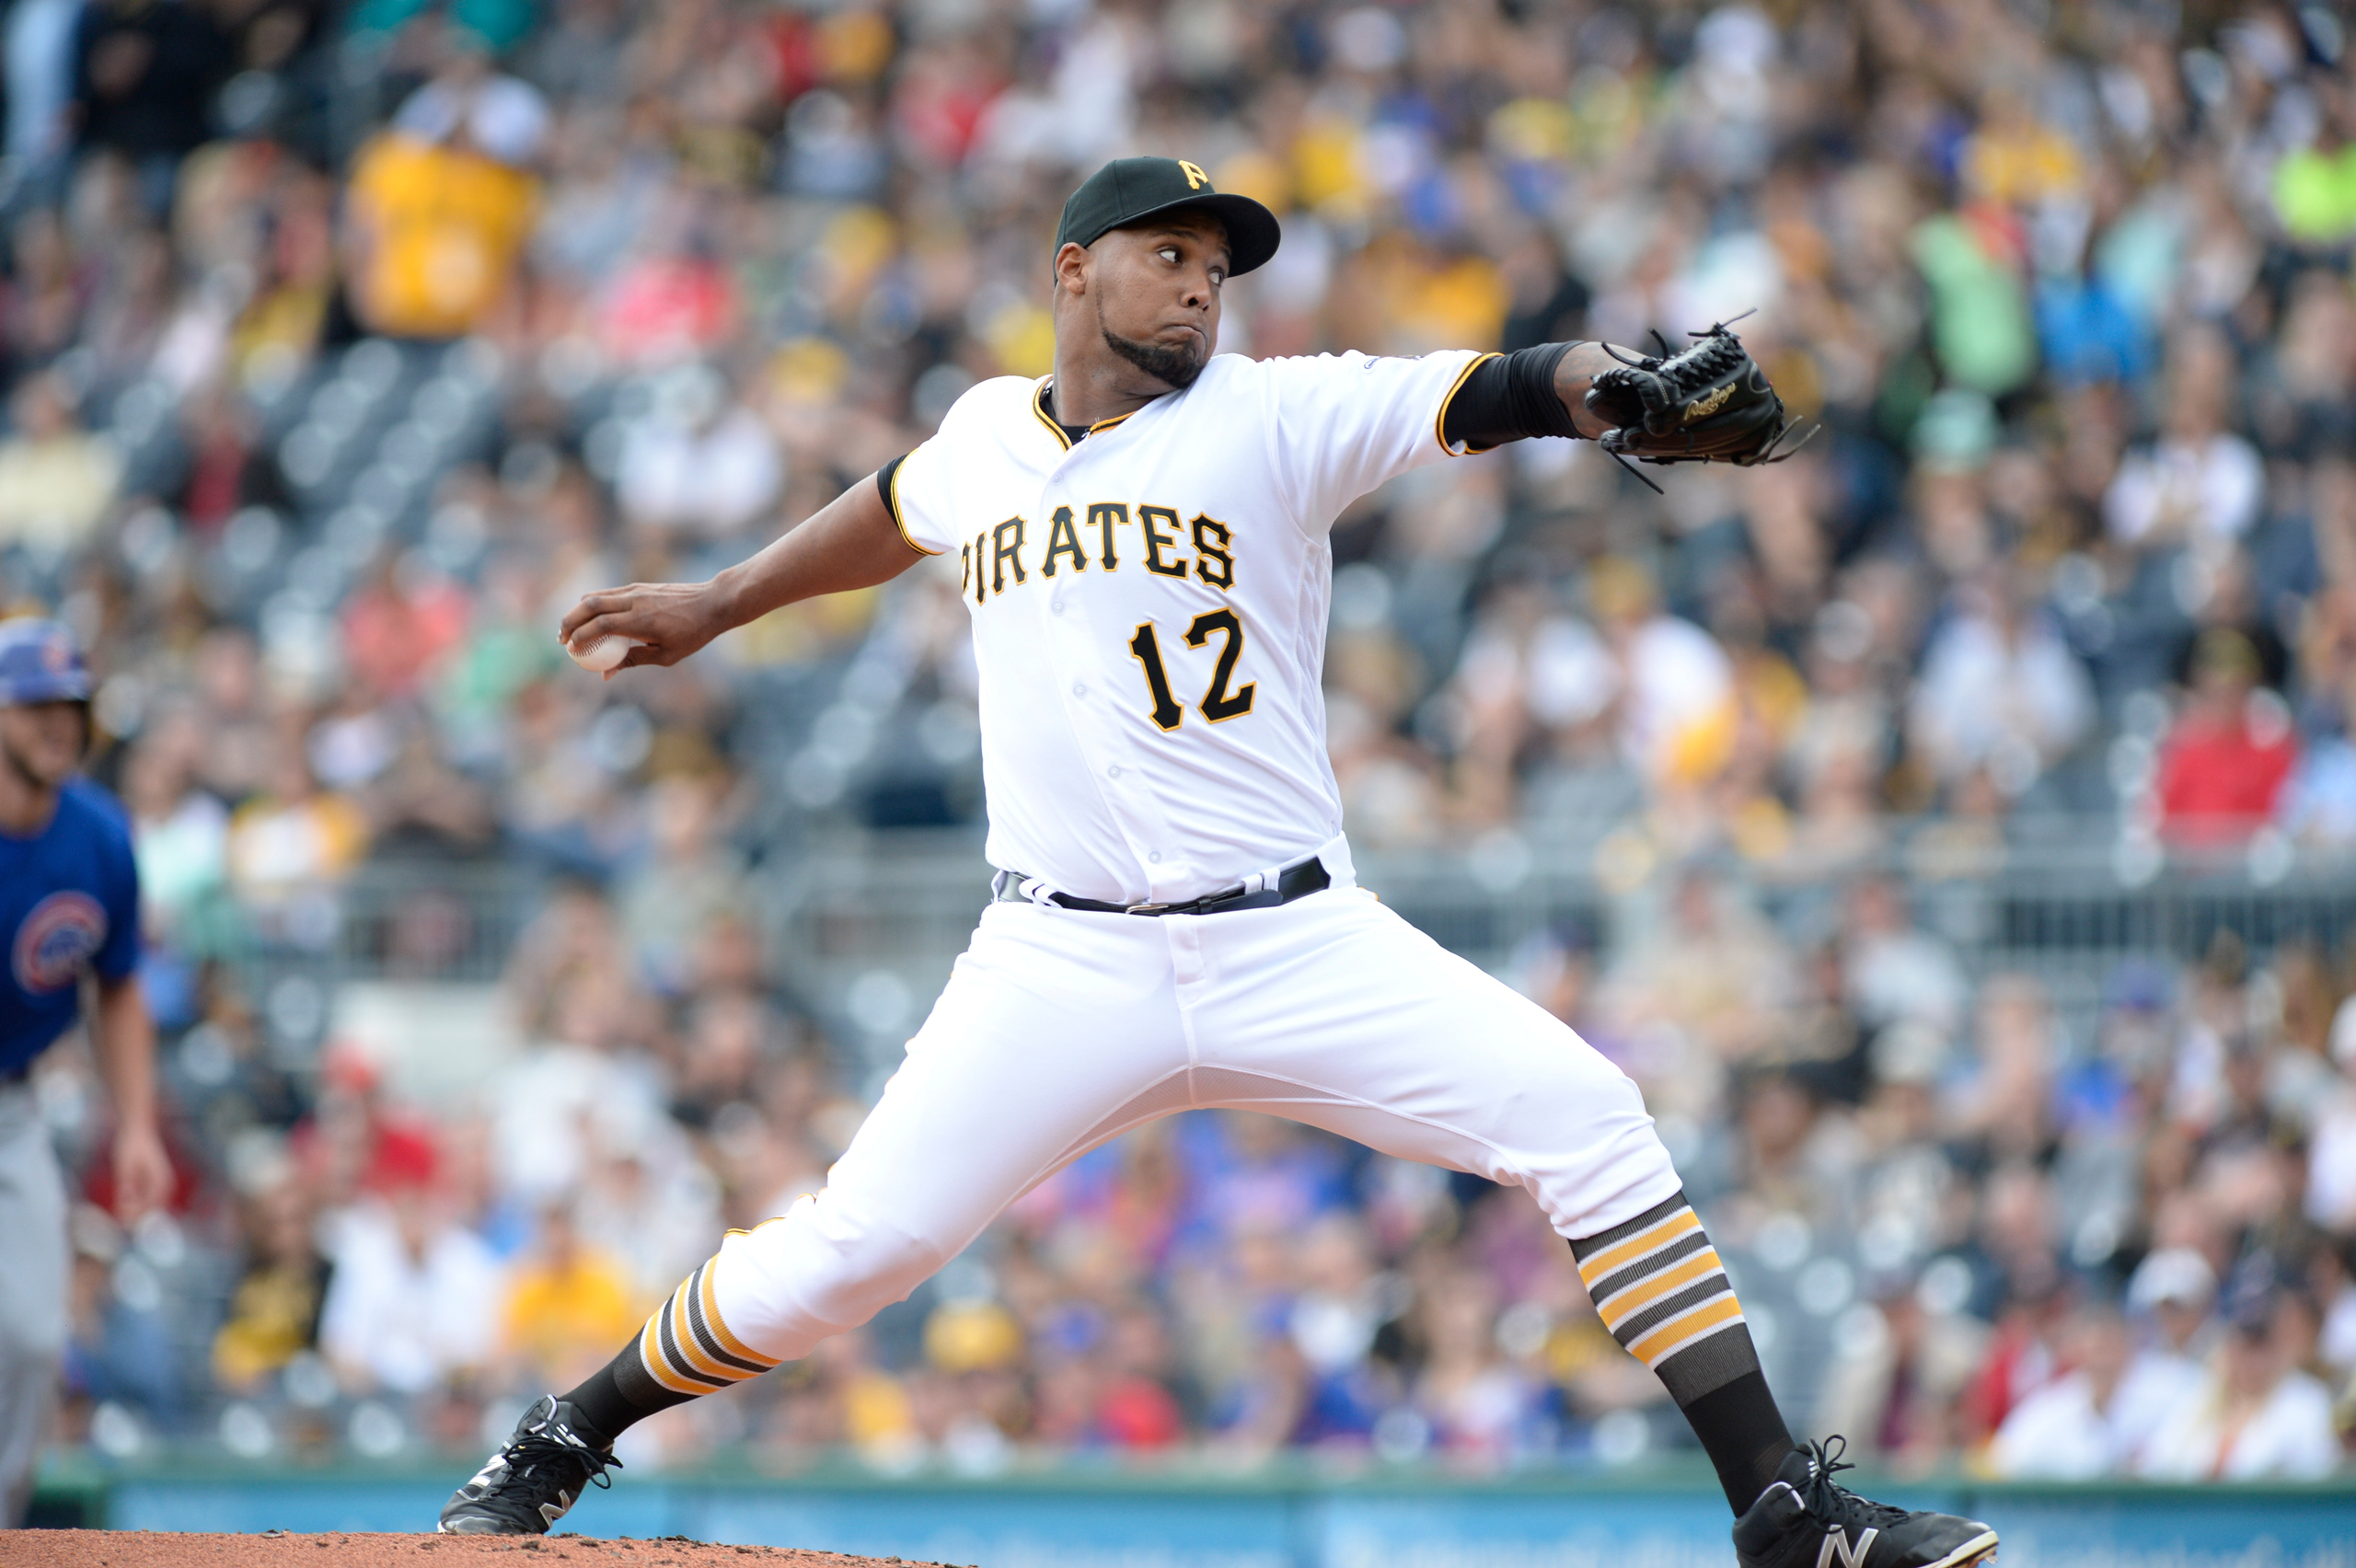 Pittsburgh Pirates starting pitcher Juan Nicasio delivers a pitch during a game versus the Chicago Cubs at PNC Park in Pittsburgh, PA., on May 4, 2016. (Shelley Lipton—Icon Sportswire/AP)